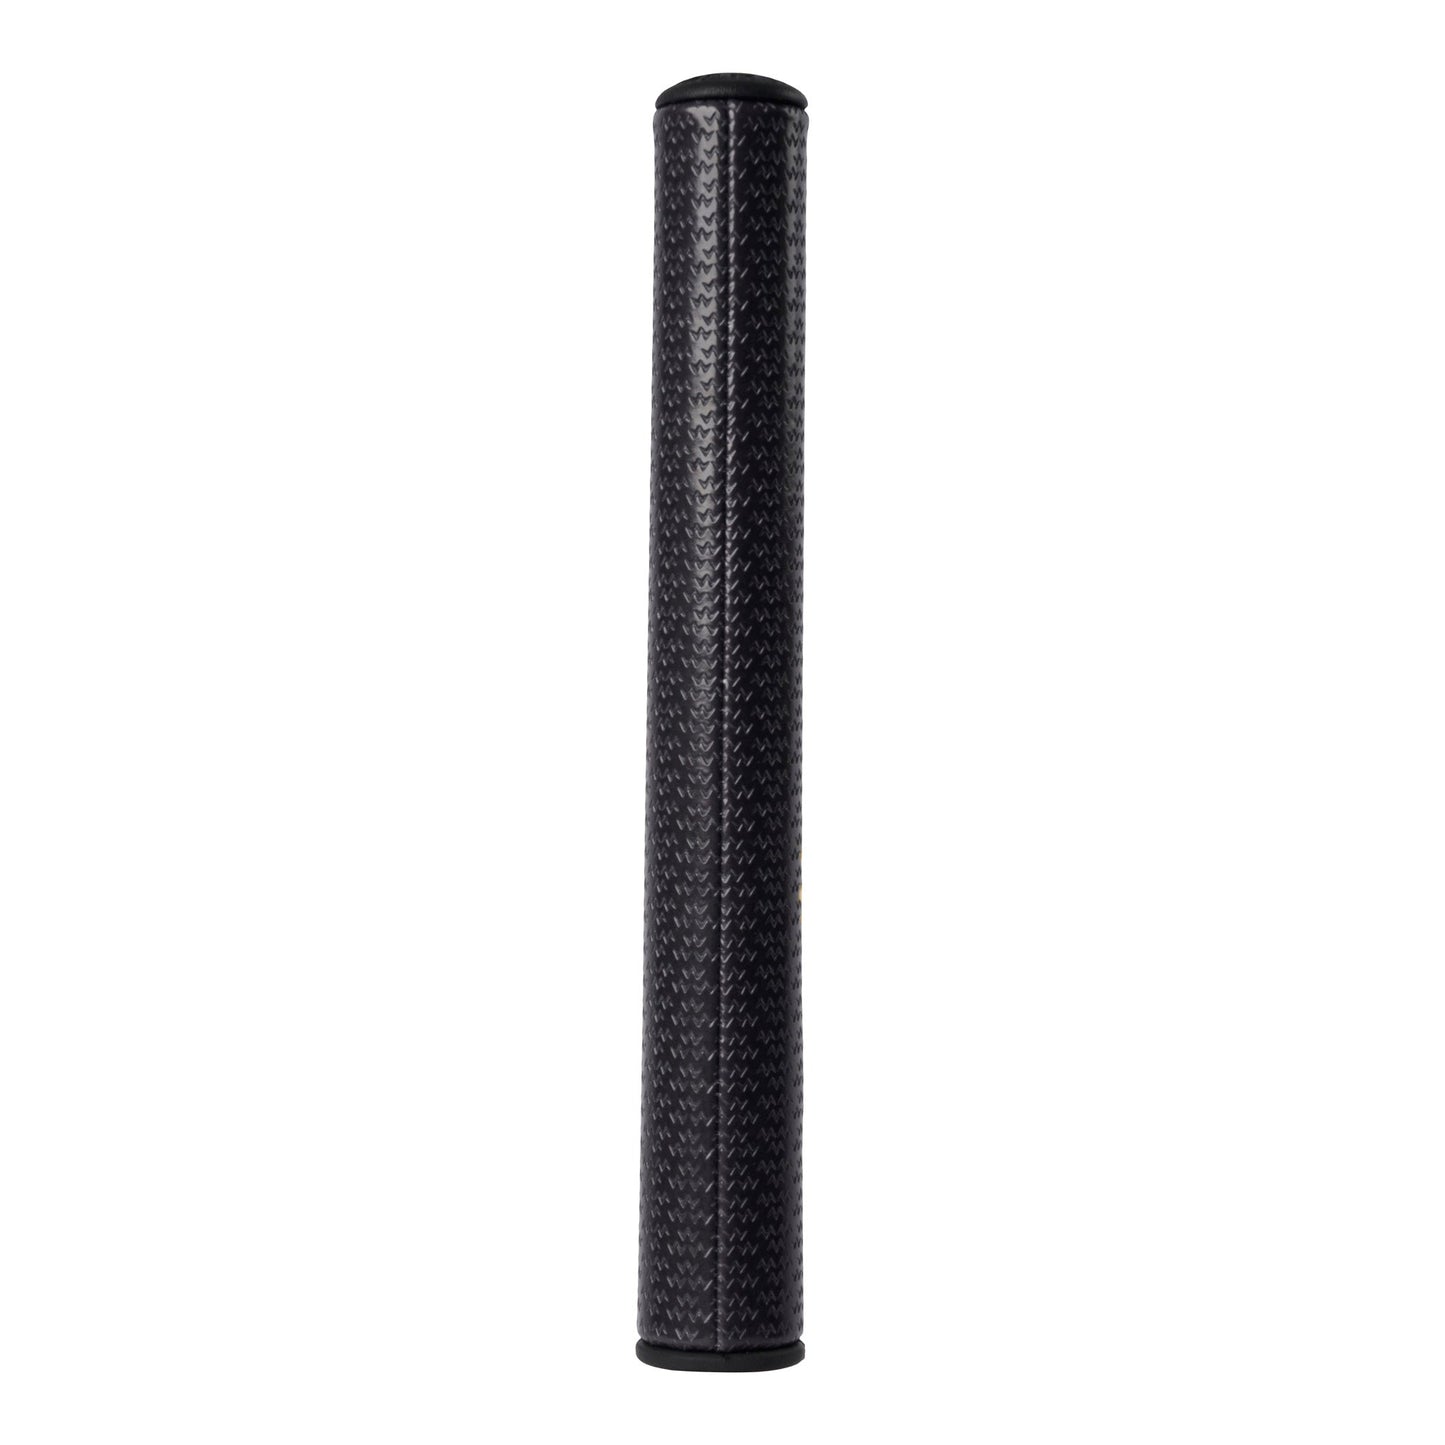 Tokyo Country Club Putter Grip